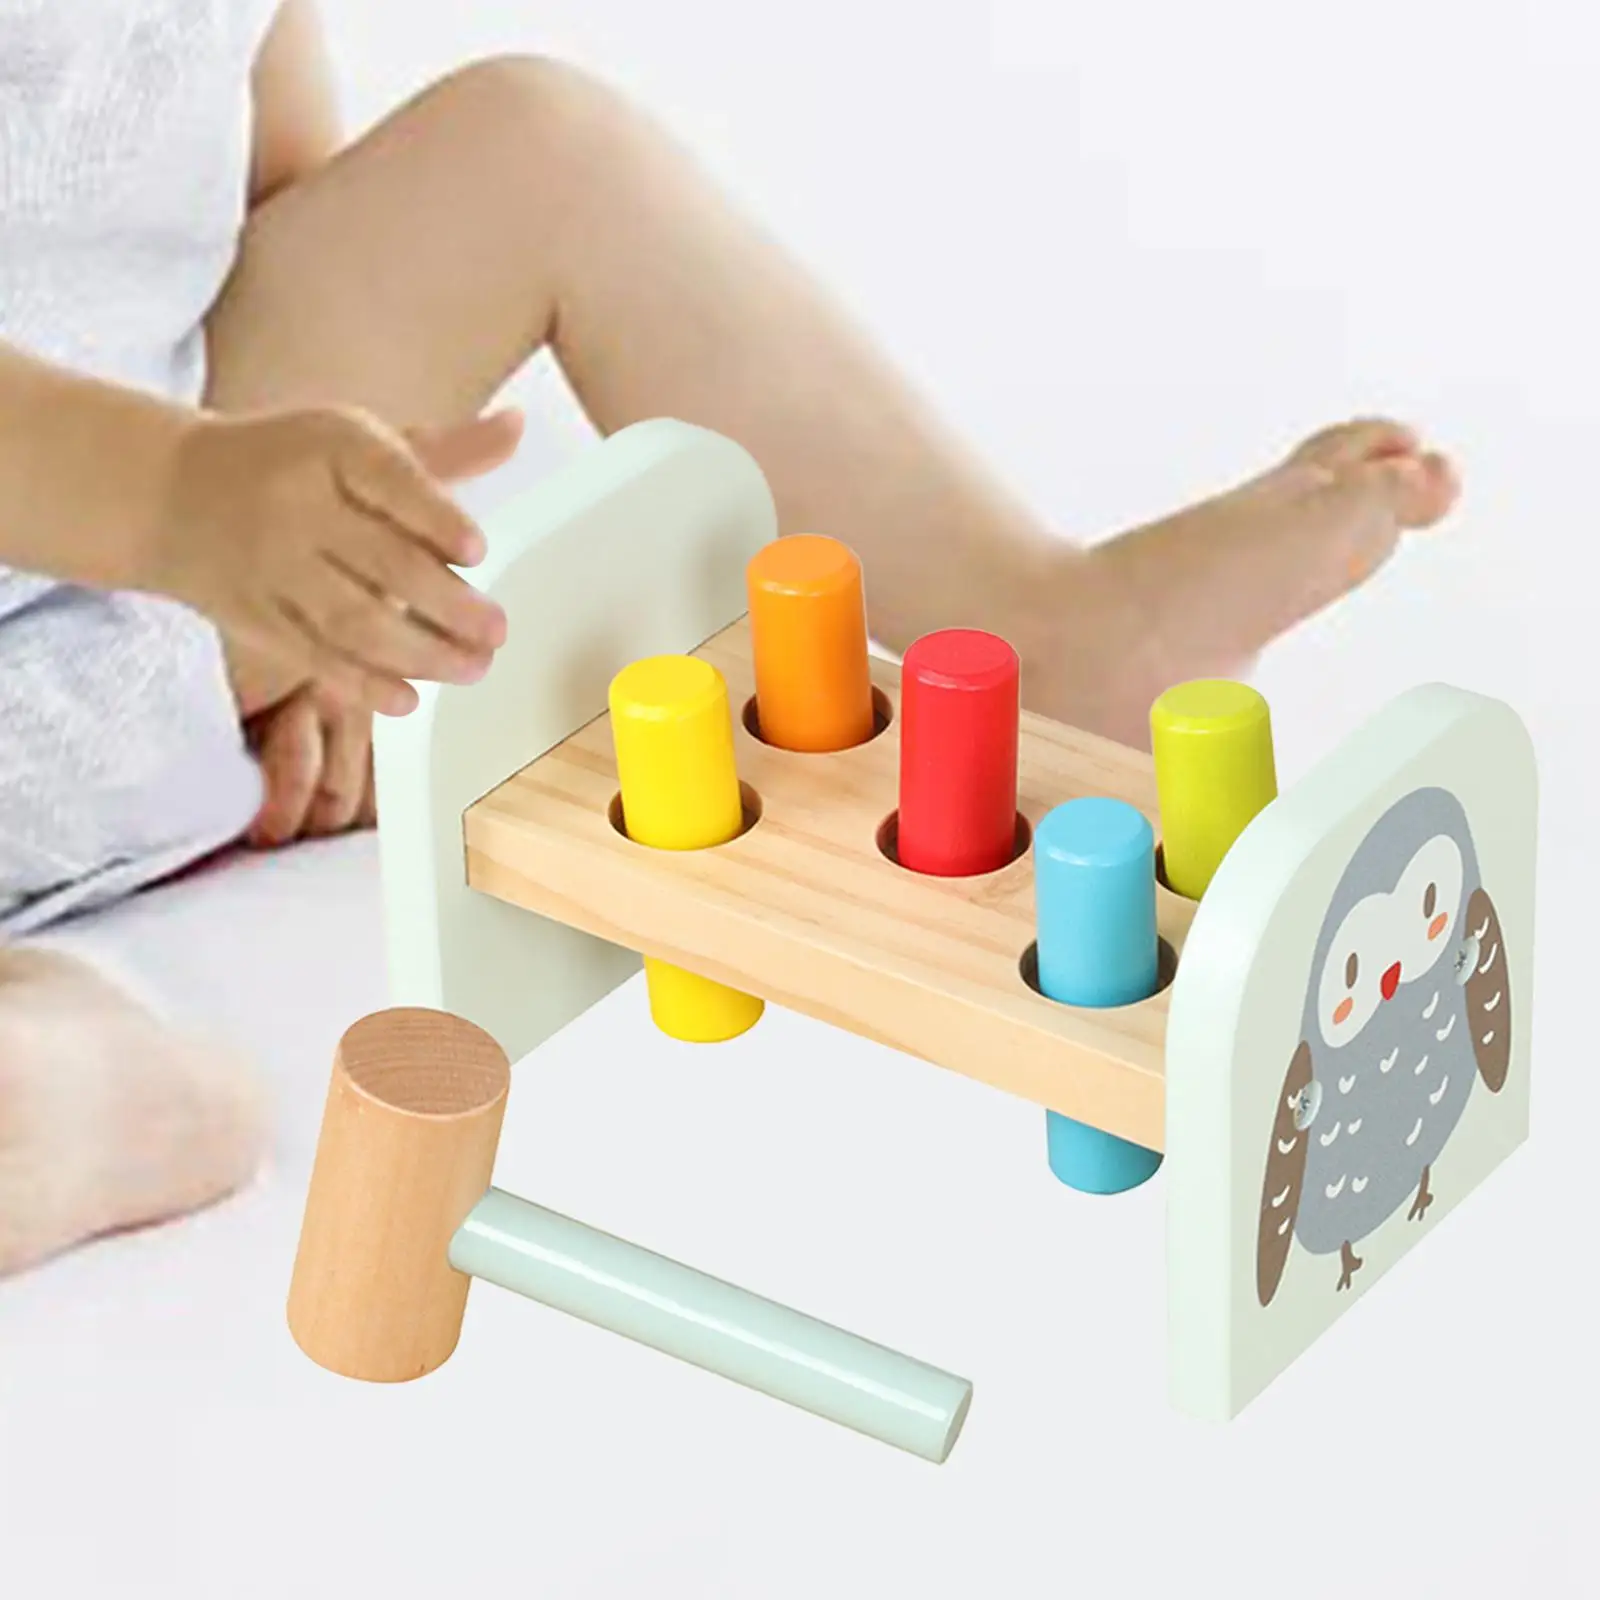 Pounding Bench Wood Toy Wooden Pounding Toy for Toddlers Boys Girls Kids